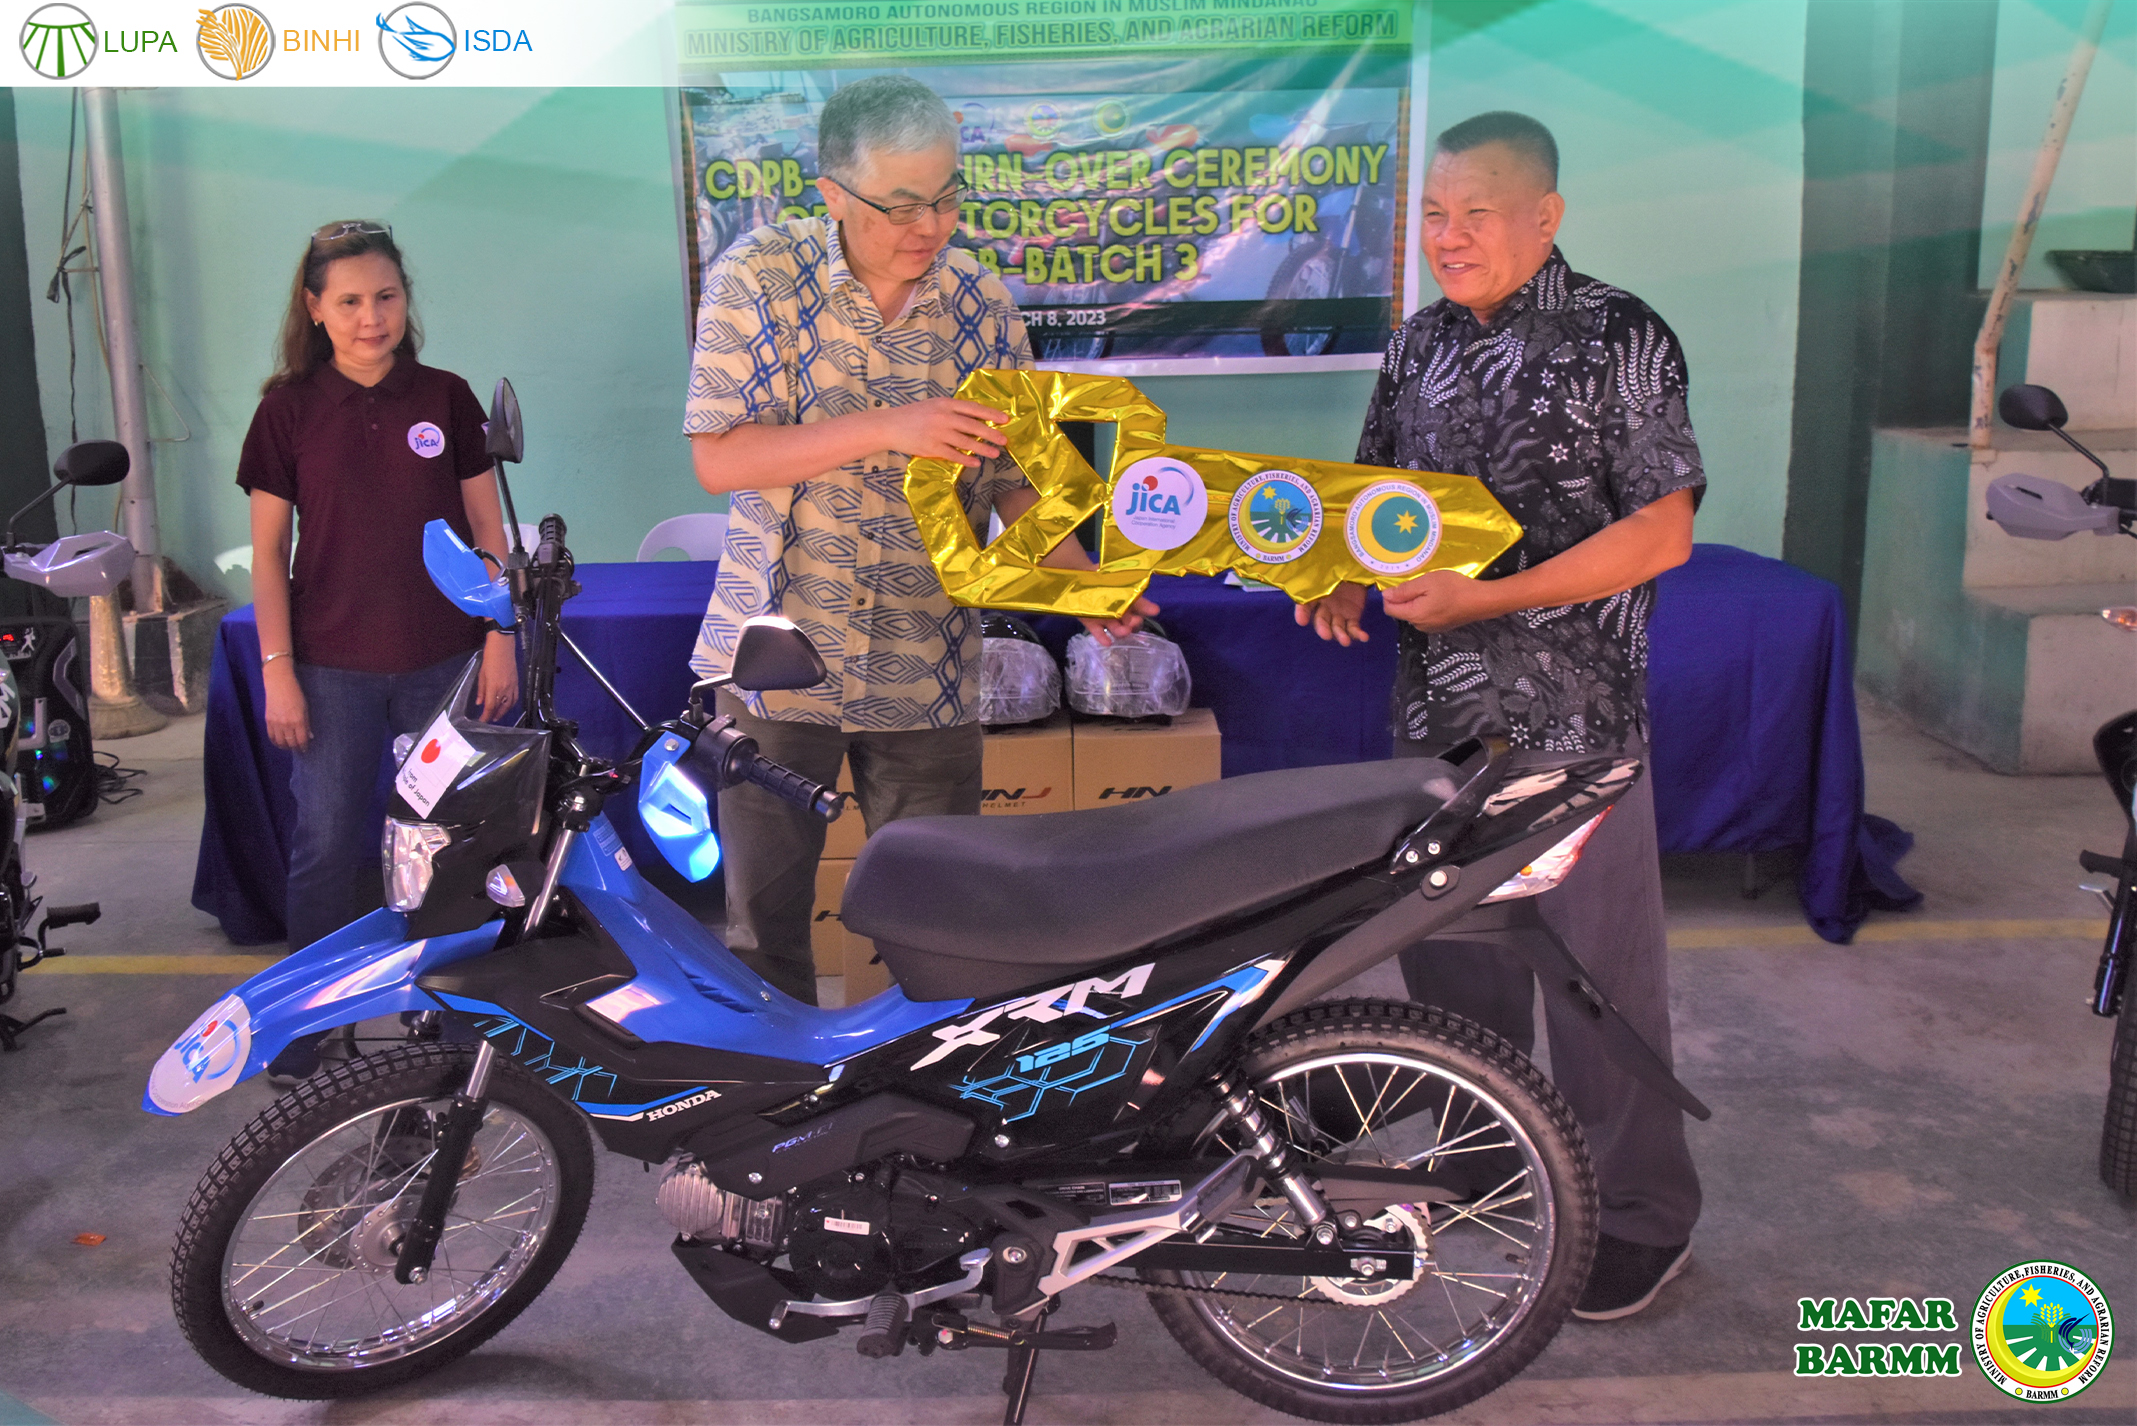 JICA turns over eighth units of motorcycles to MAFAR Agriculture Extension Workers